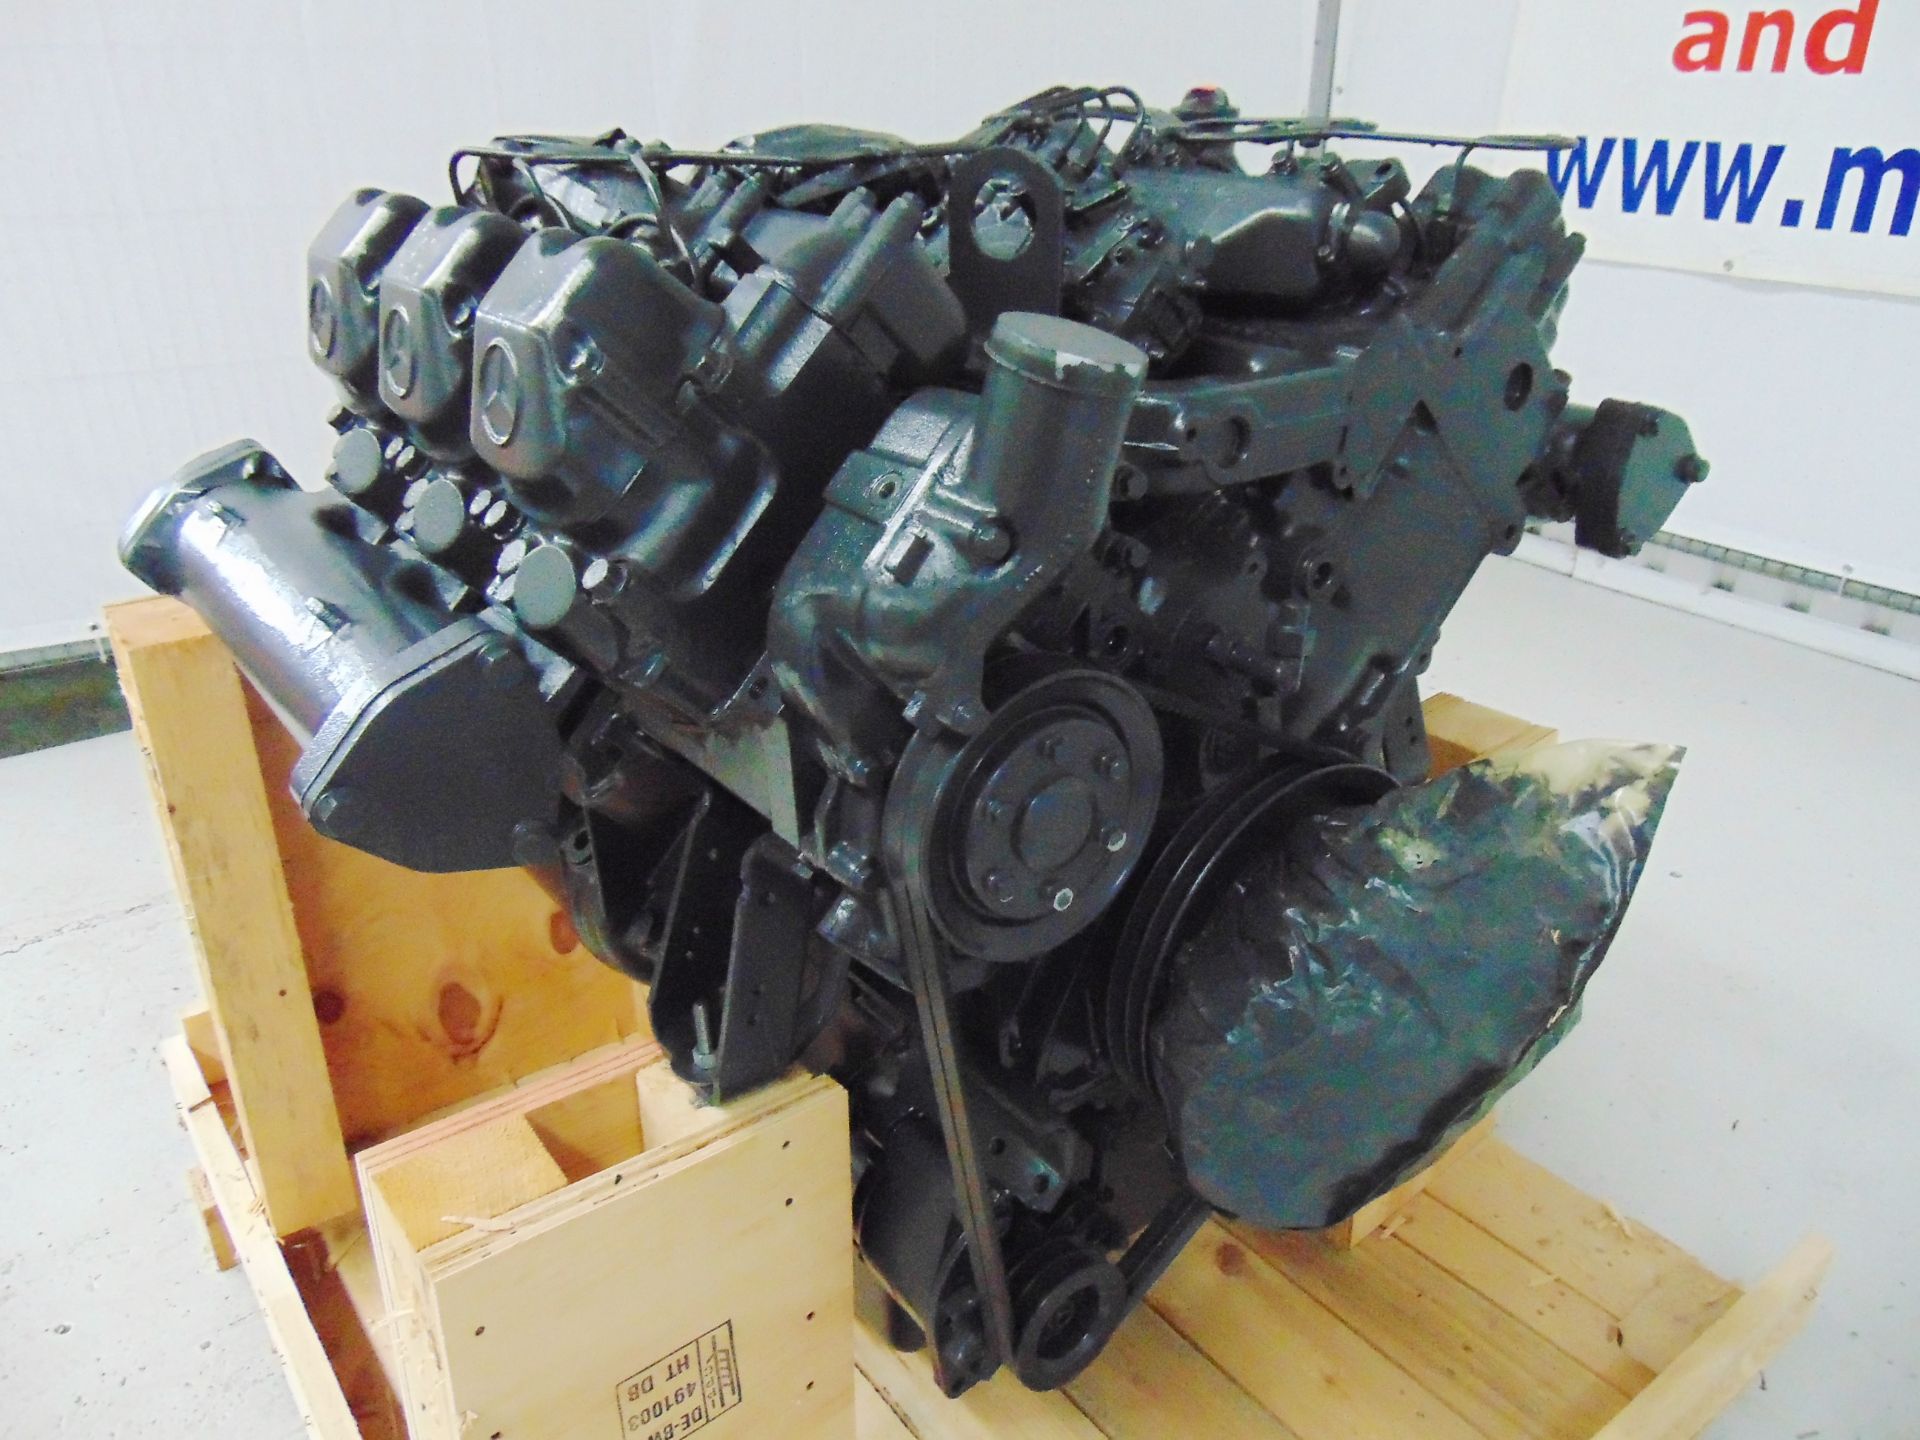 Factory Reconditioned Mercedes-Benz OM441 V6 Turbo Diesel Engine - Image 4 of 14